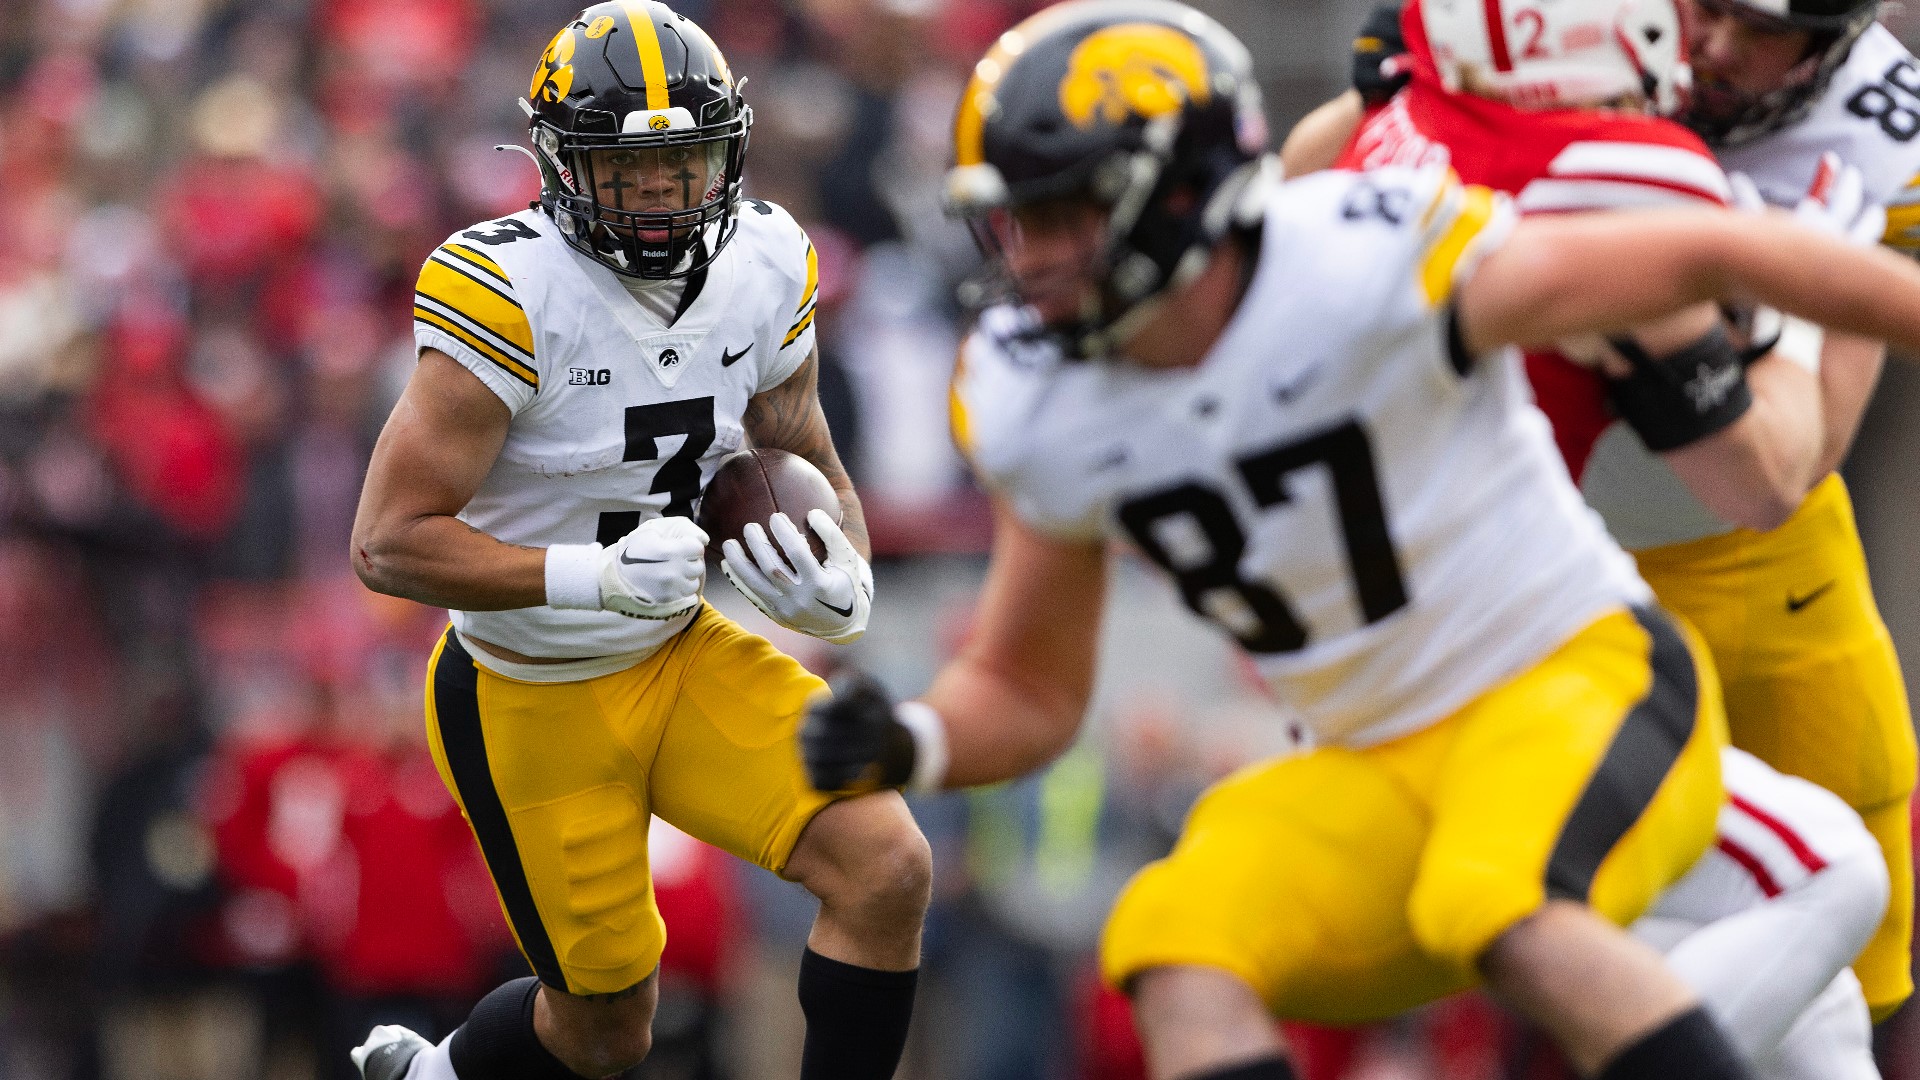 University of Iowa football player Kaleb Brown has been arrested for OWI in Iowa City over the weekend. Police say Brown's vehicle had significant front-end damage.